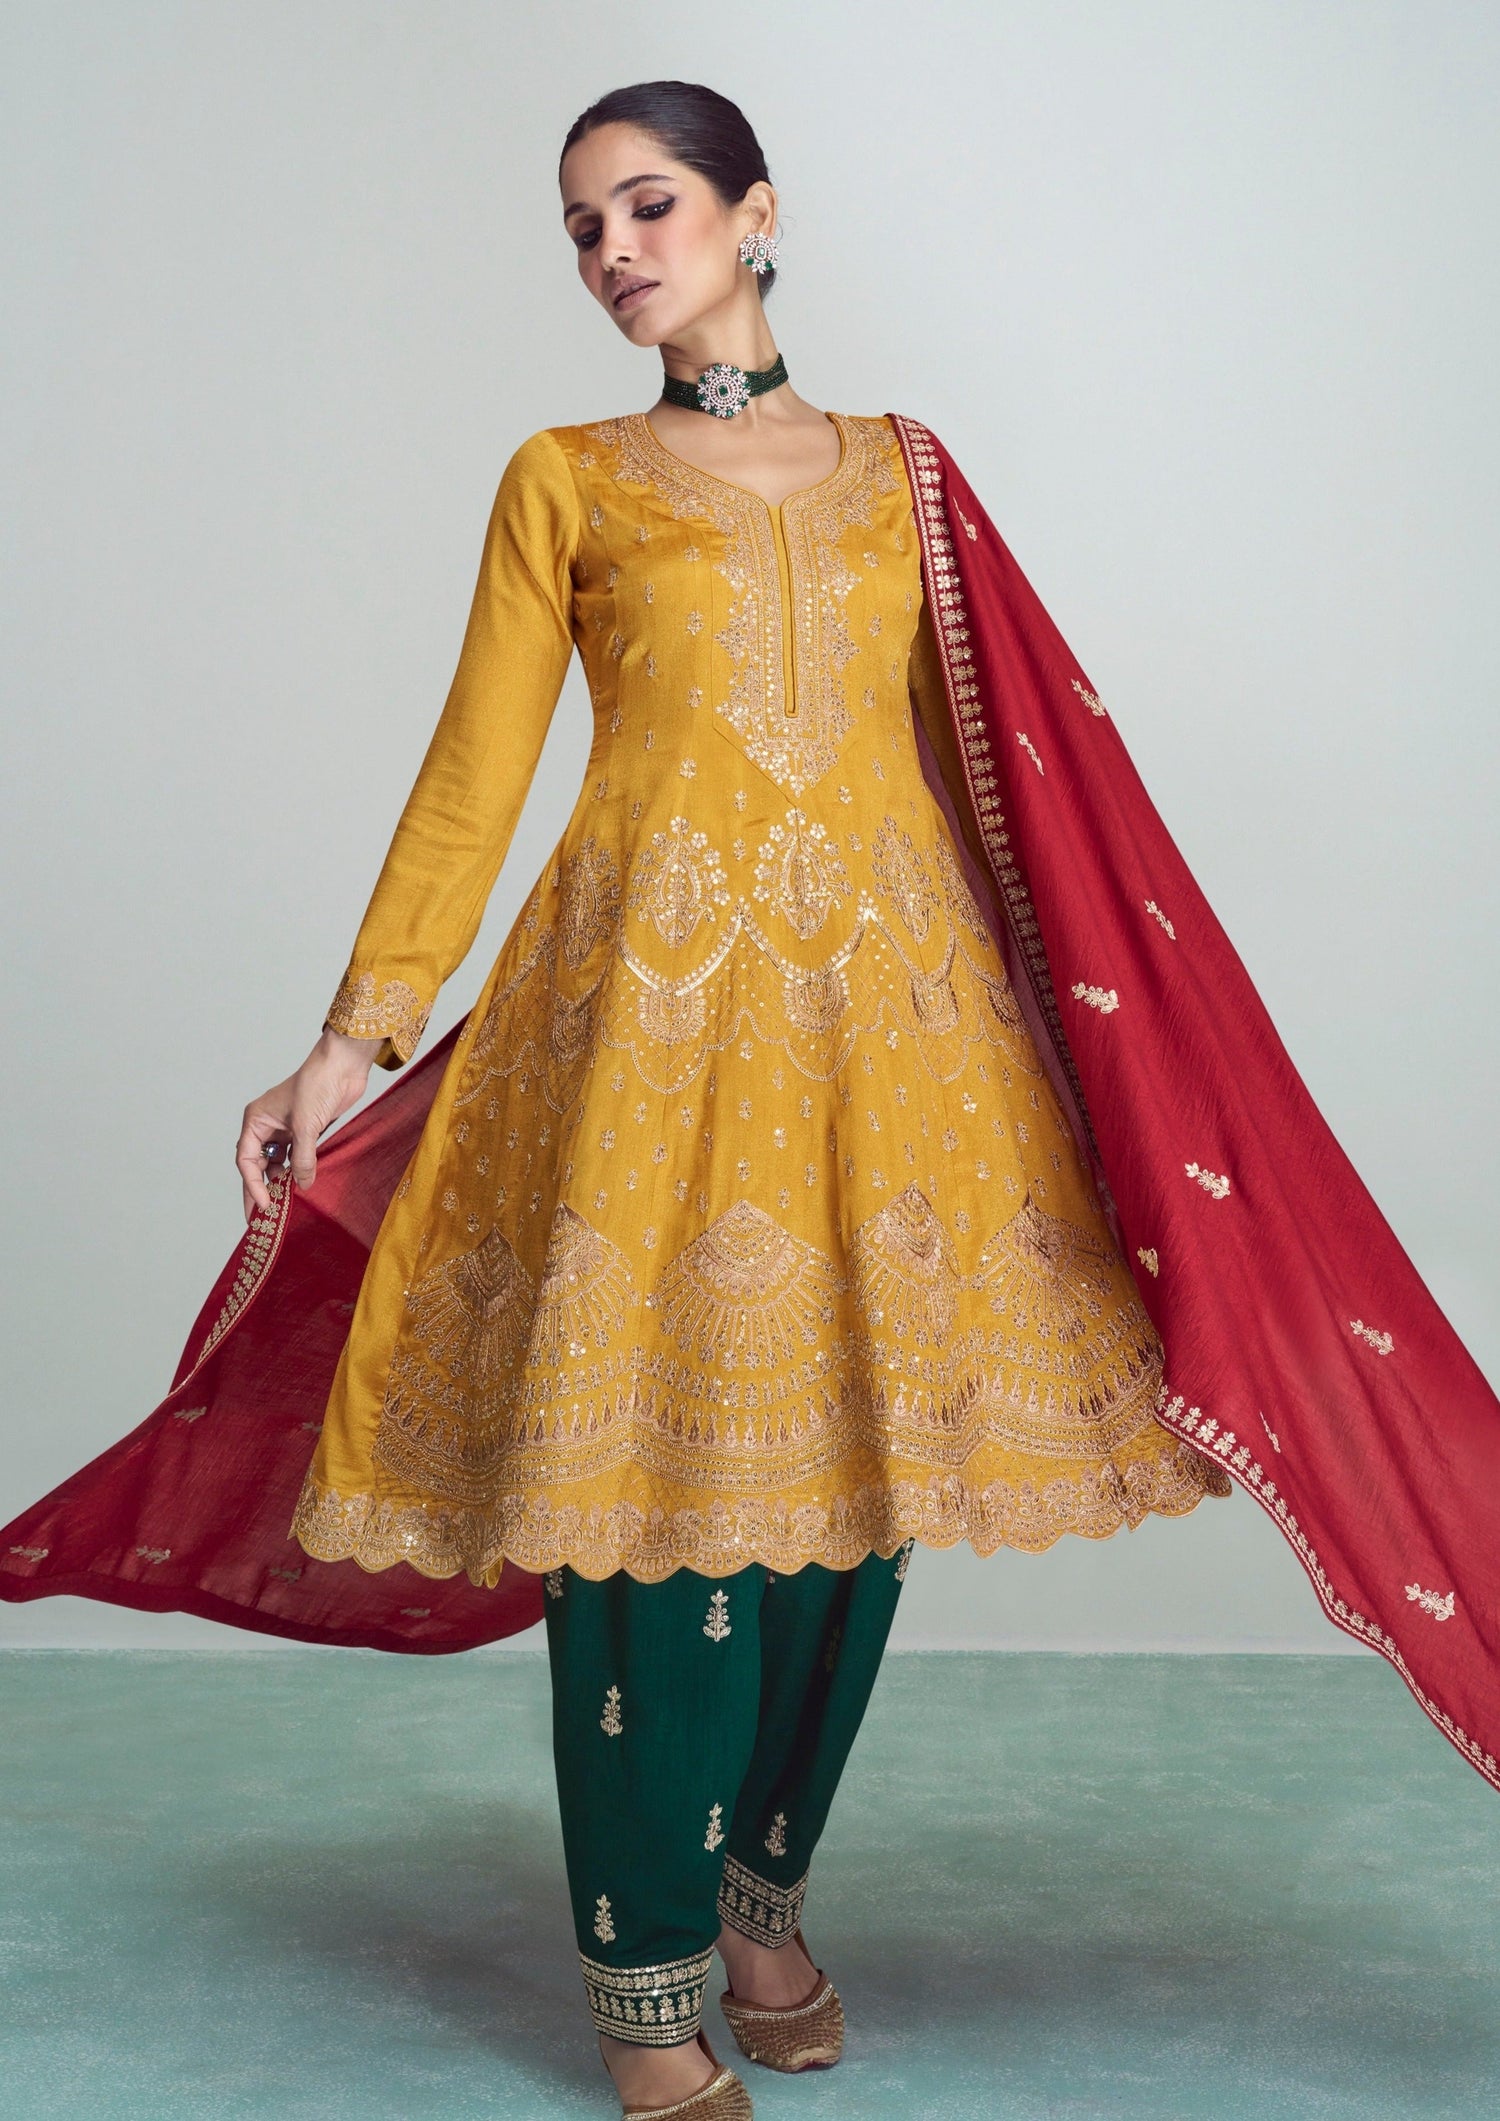 Bride in yellow silk salwar suit and red dupatta